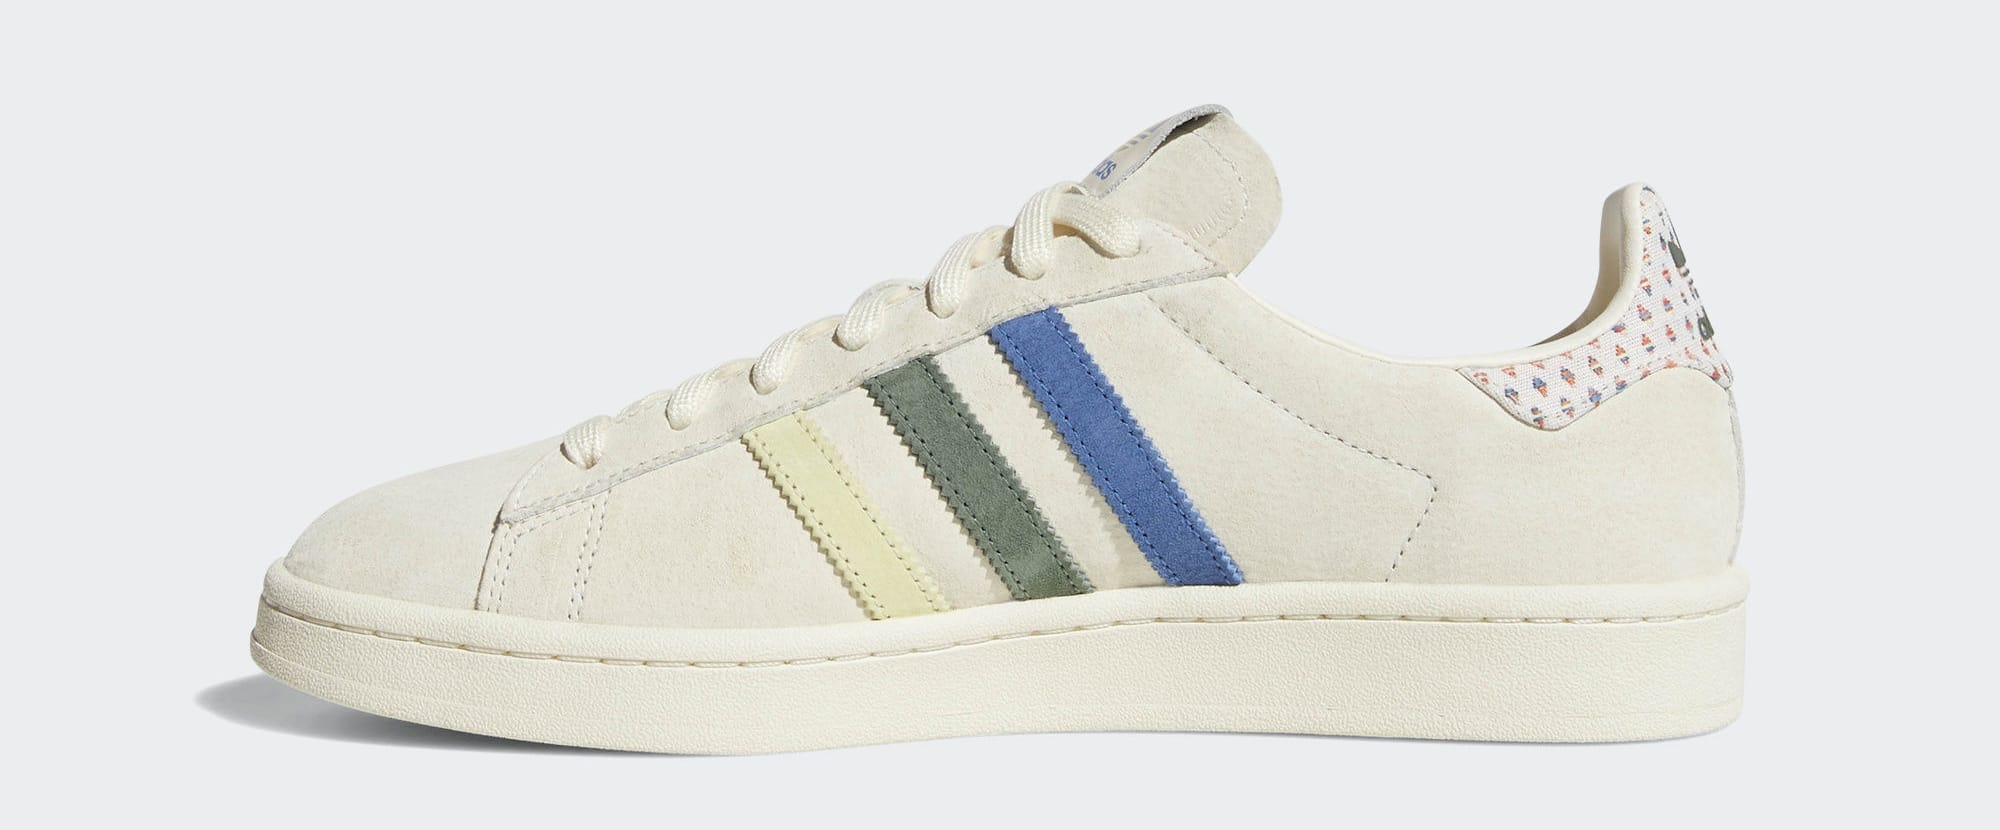 Adidas Embraces LGBTQ Community With New Pride Sneakers